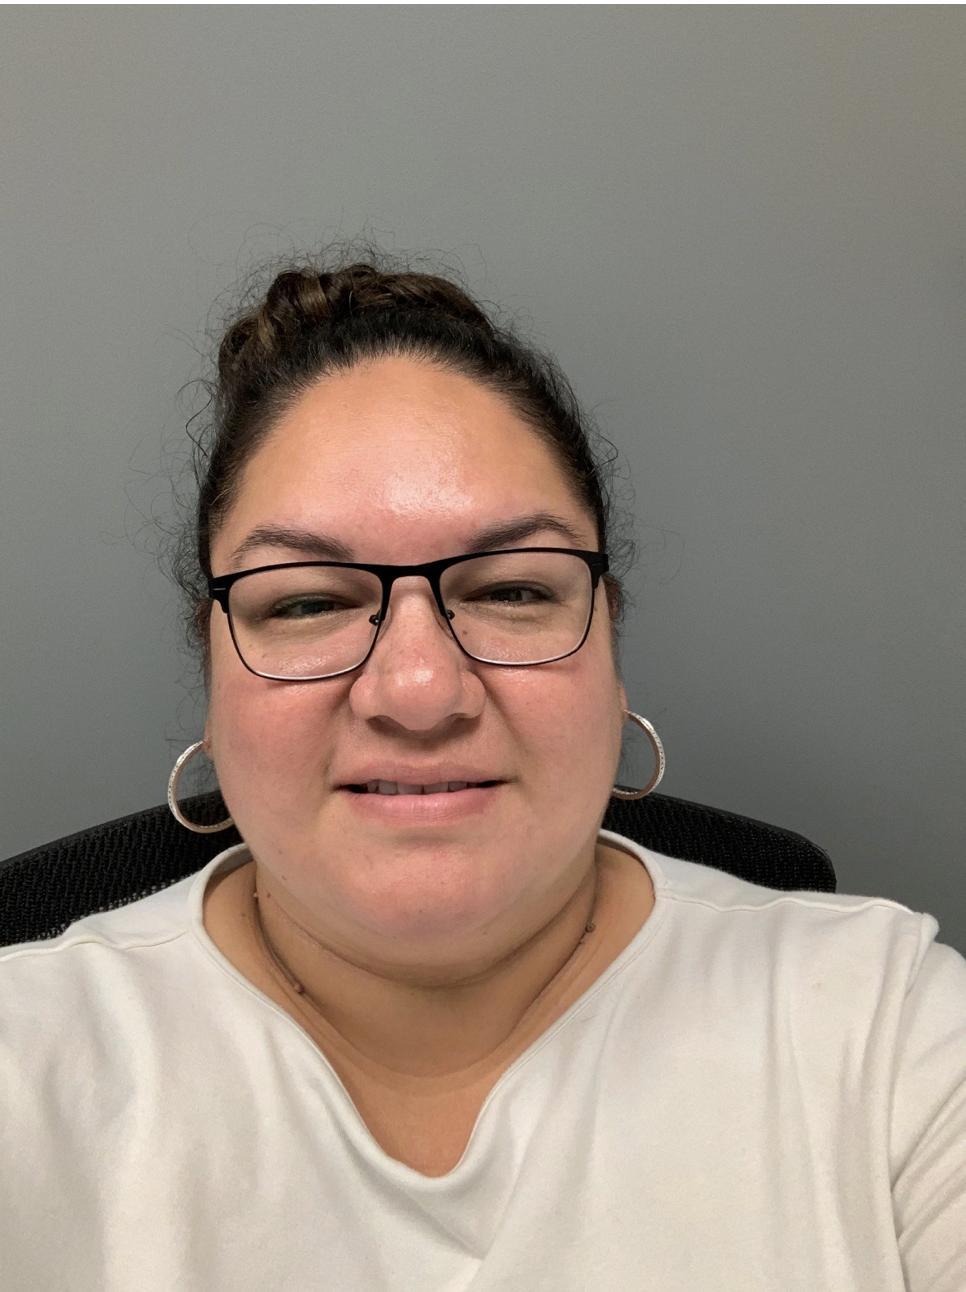 Trista Hill is an Indigenous woman with dark hair in a bun, wearing glasses and large hoop earrings. She is wearing a white shirt. You can see the top of her chair and a grey wall behind her.